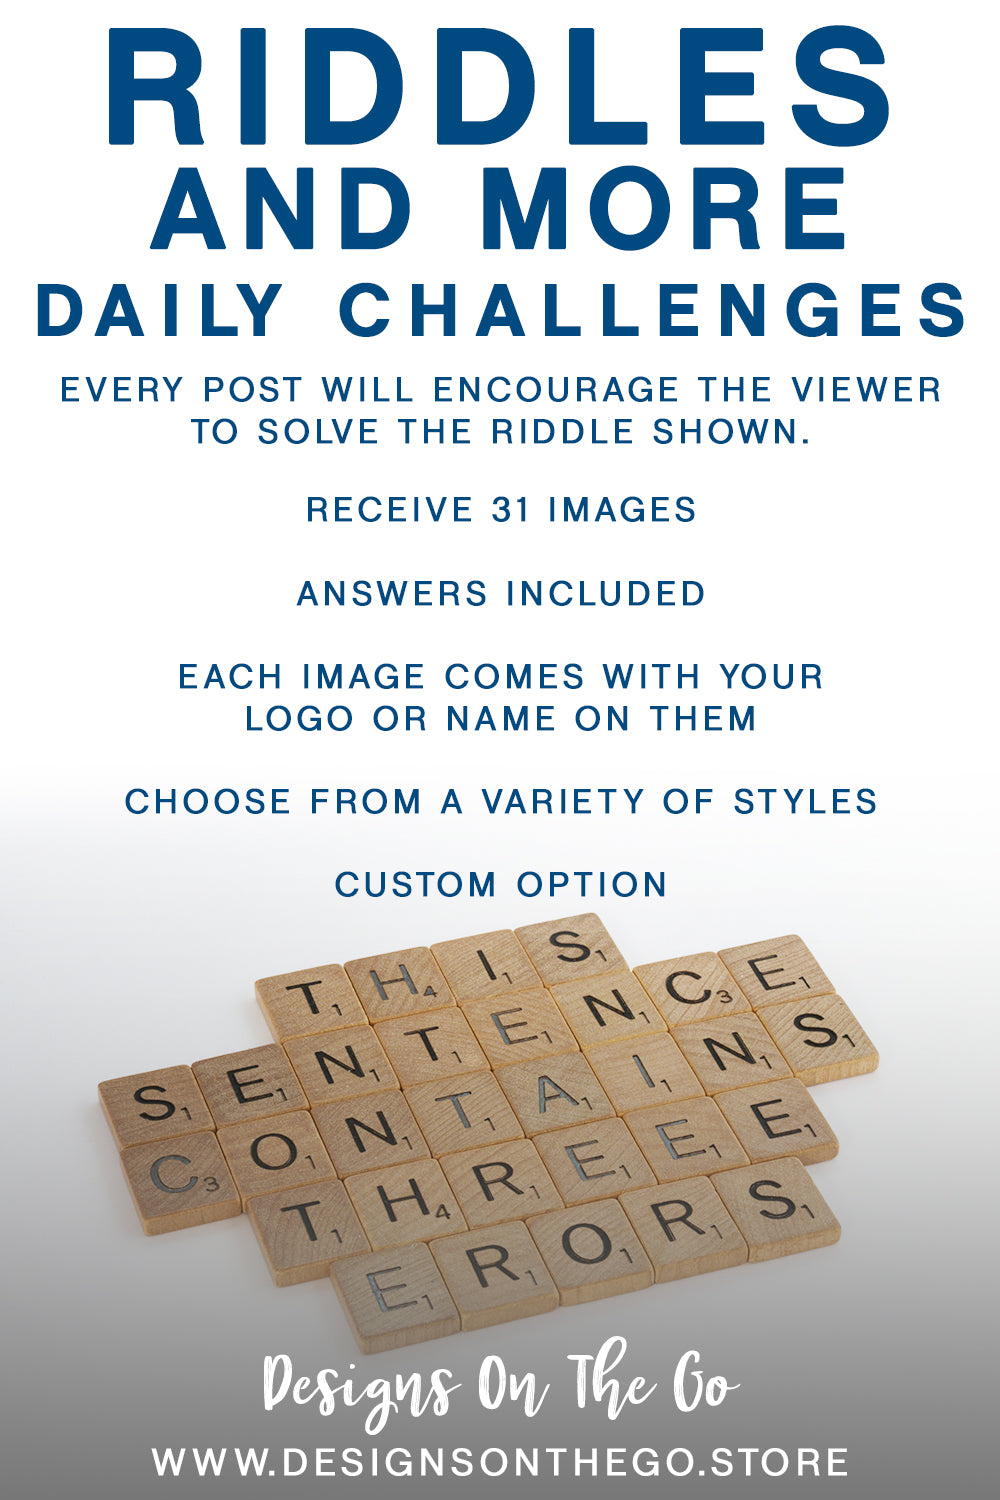 Riddles and More Daily Challenges